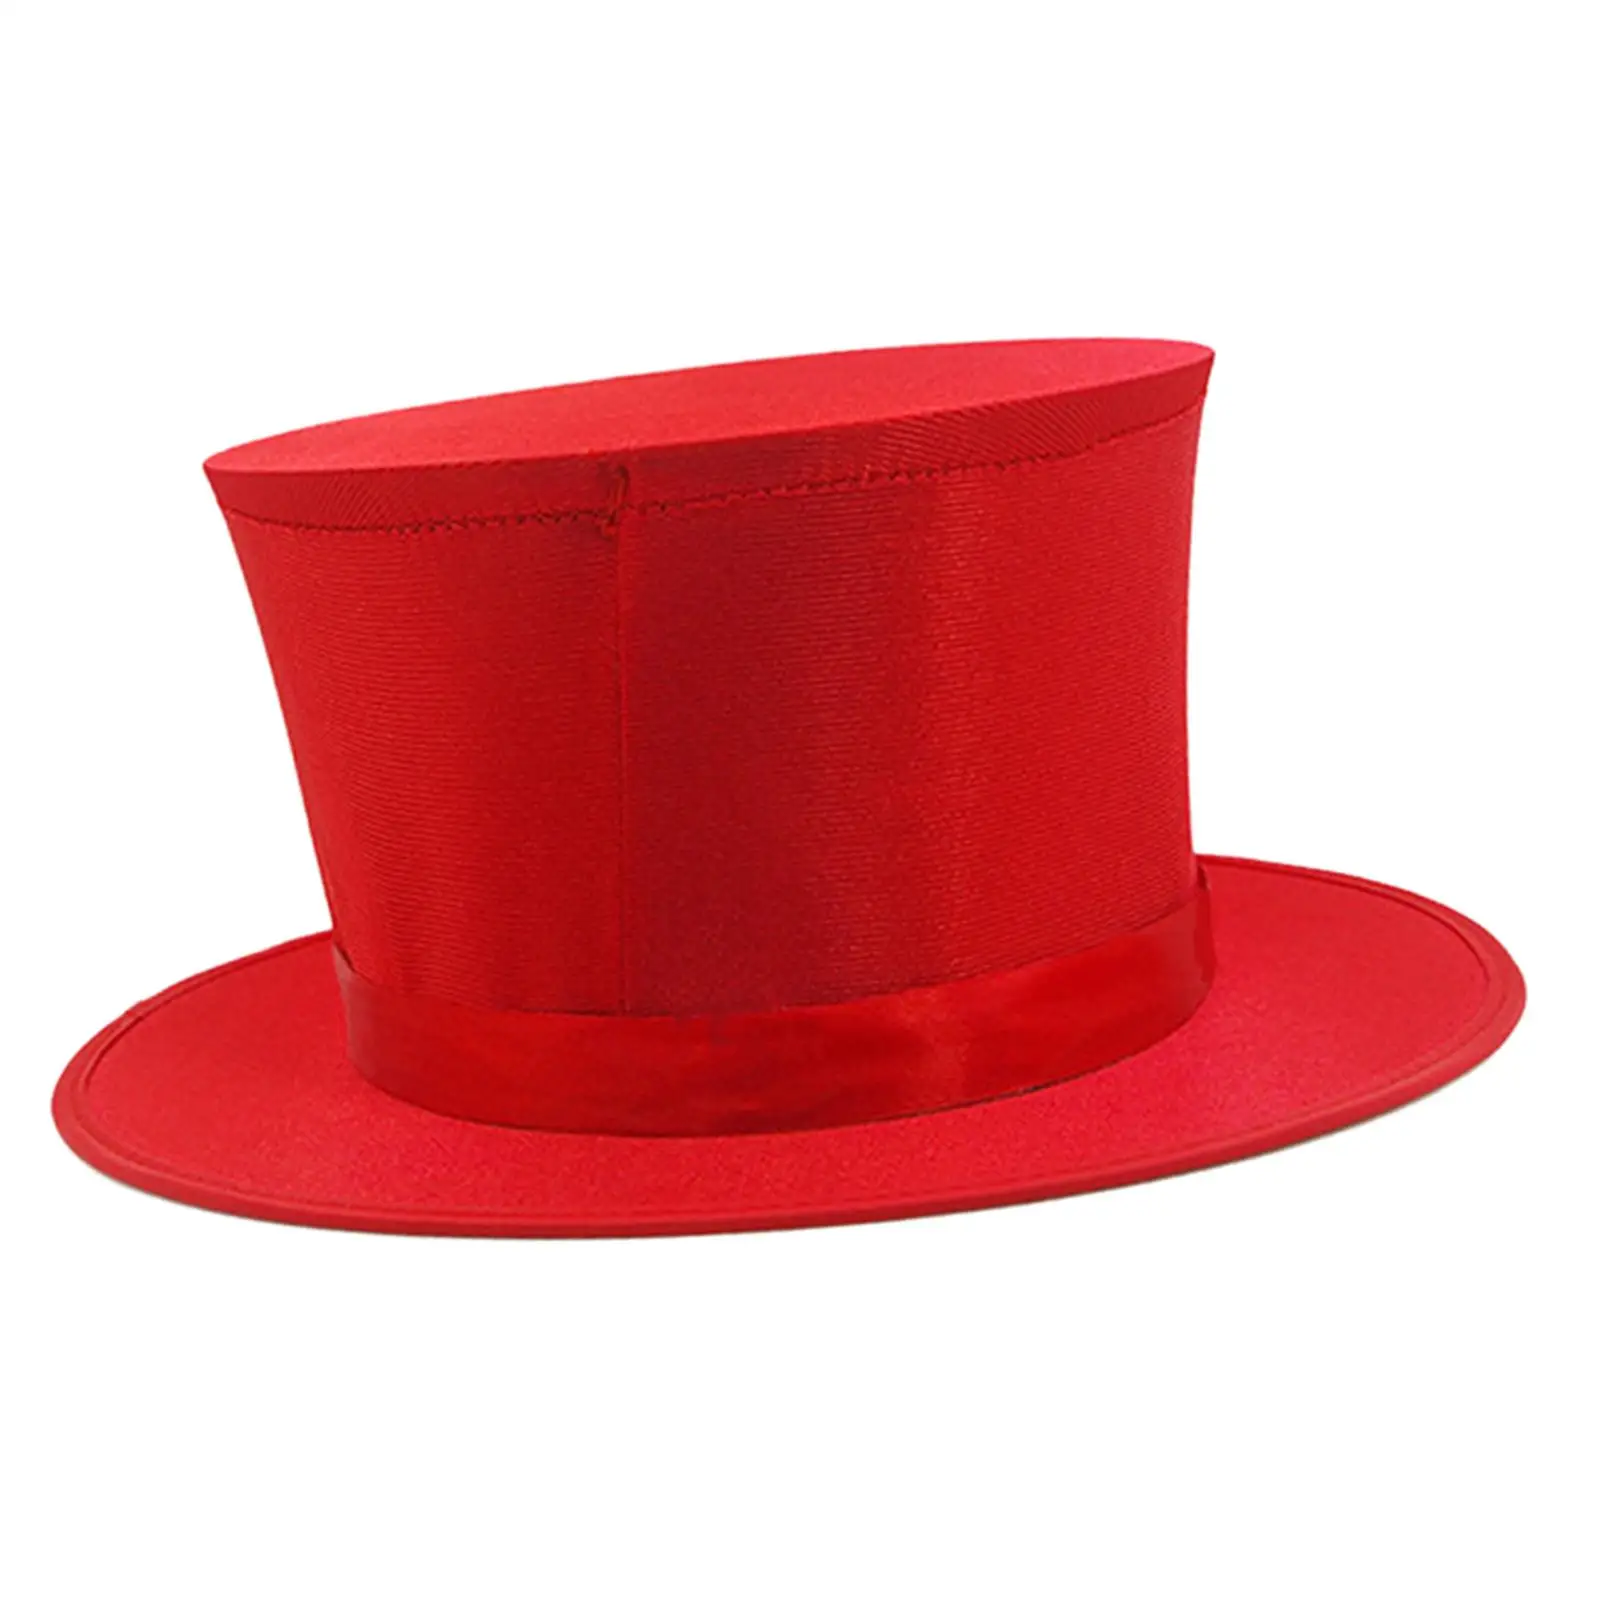 spring hat Props Creative Essential Supplies fun props Object Game Illusions Magician Top Hat magical Tricks for Kids Party